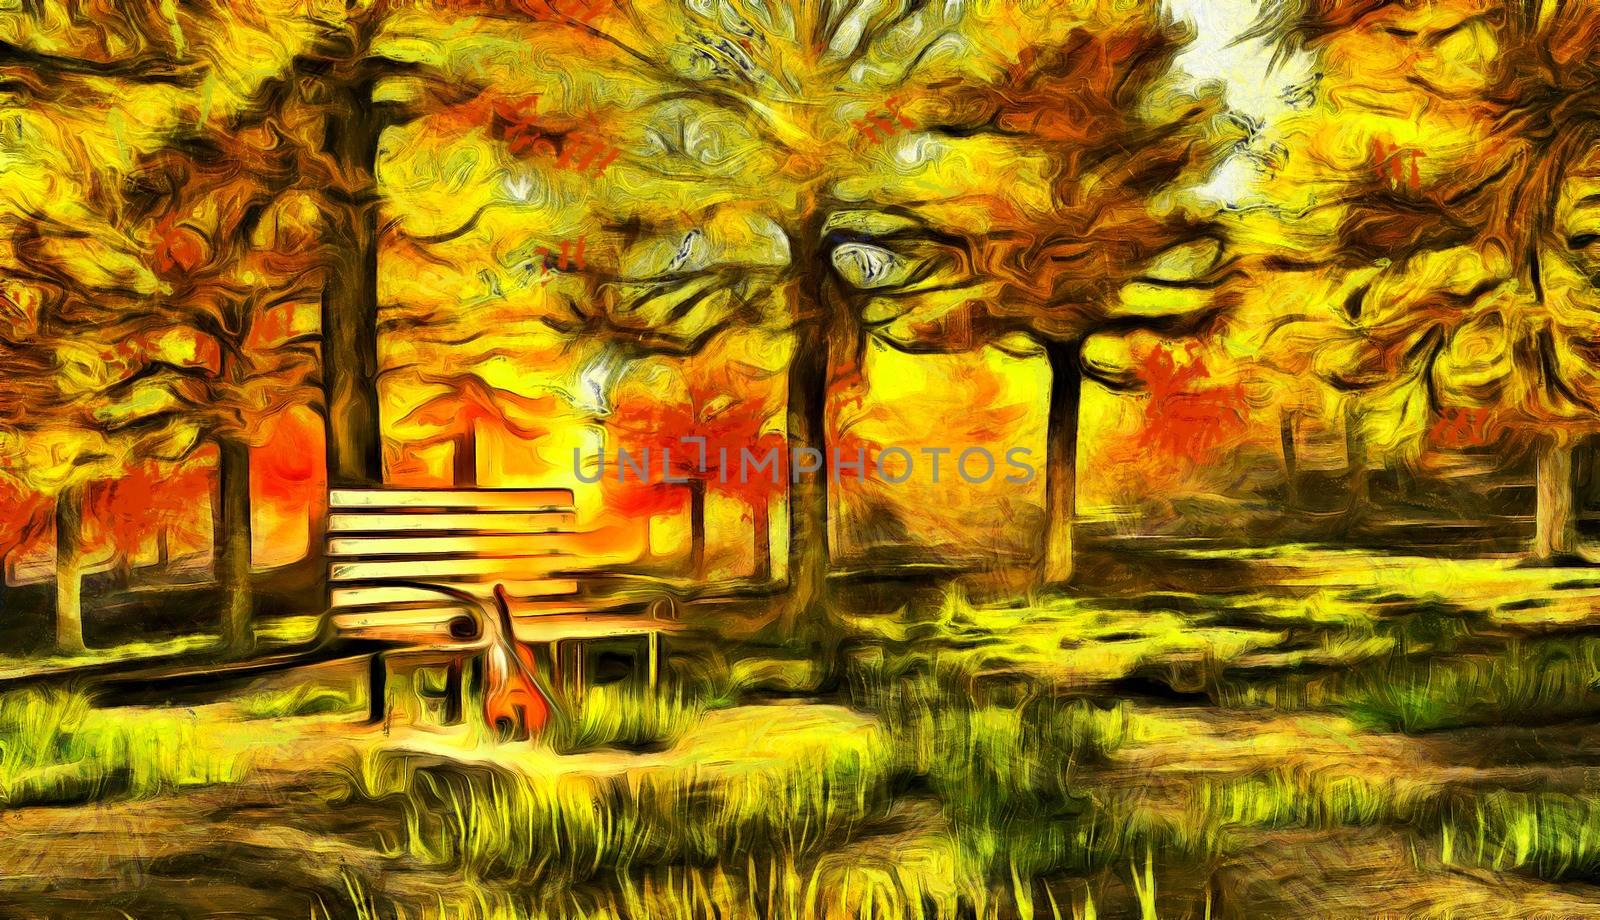 Digital painting in impressionism style. Violin in autumn park.